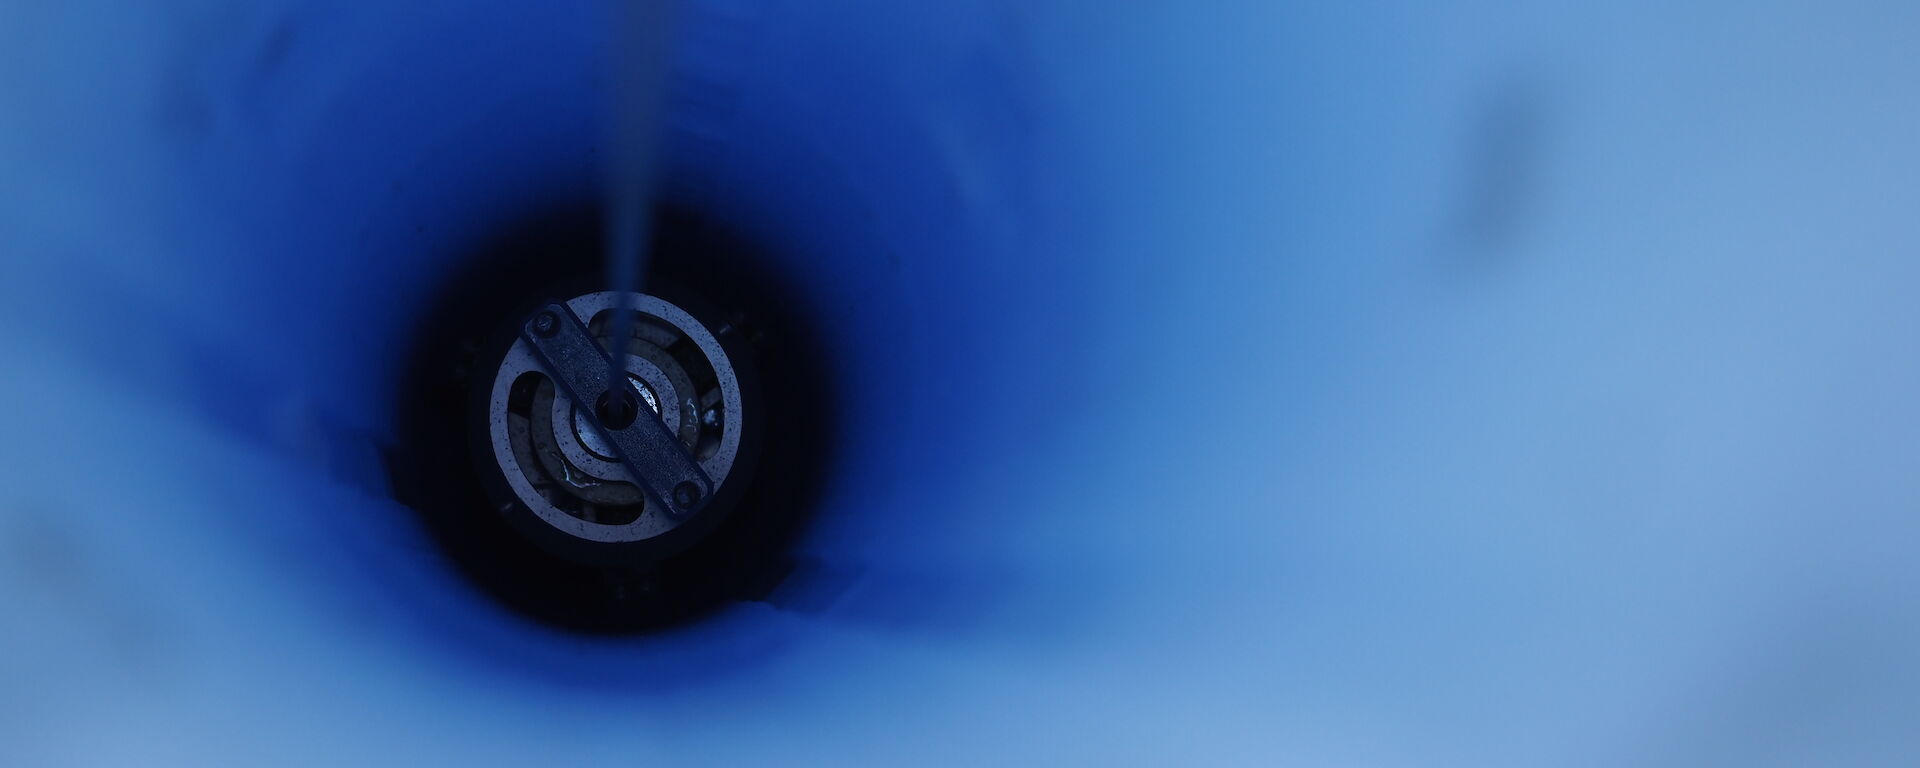 looking down a hole through blue ice with drill inside